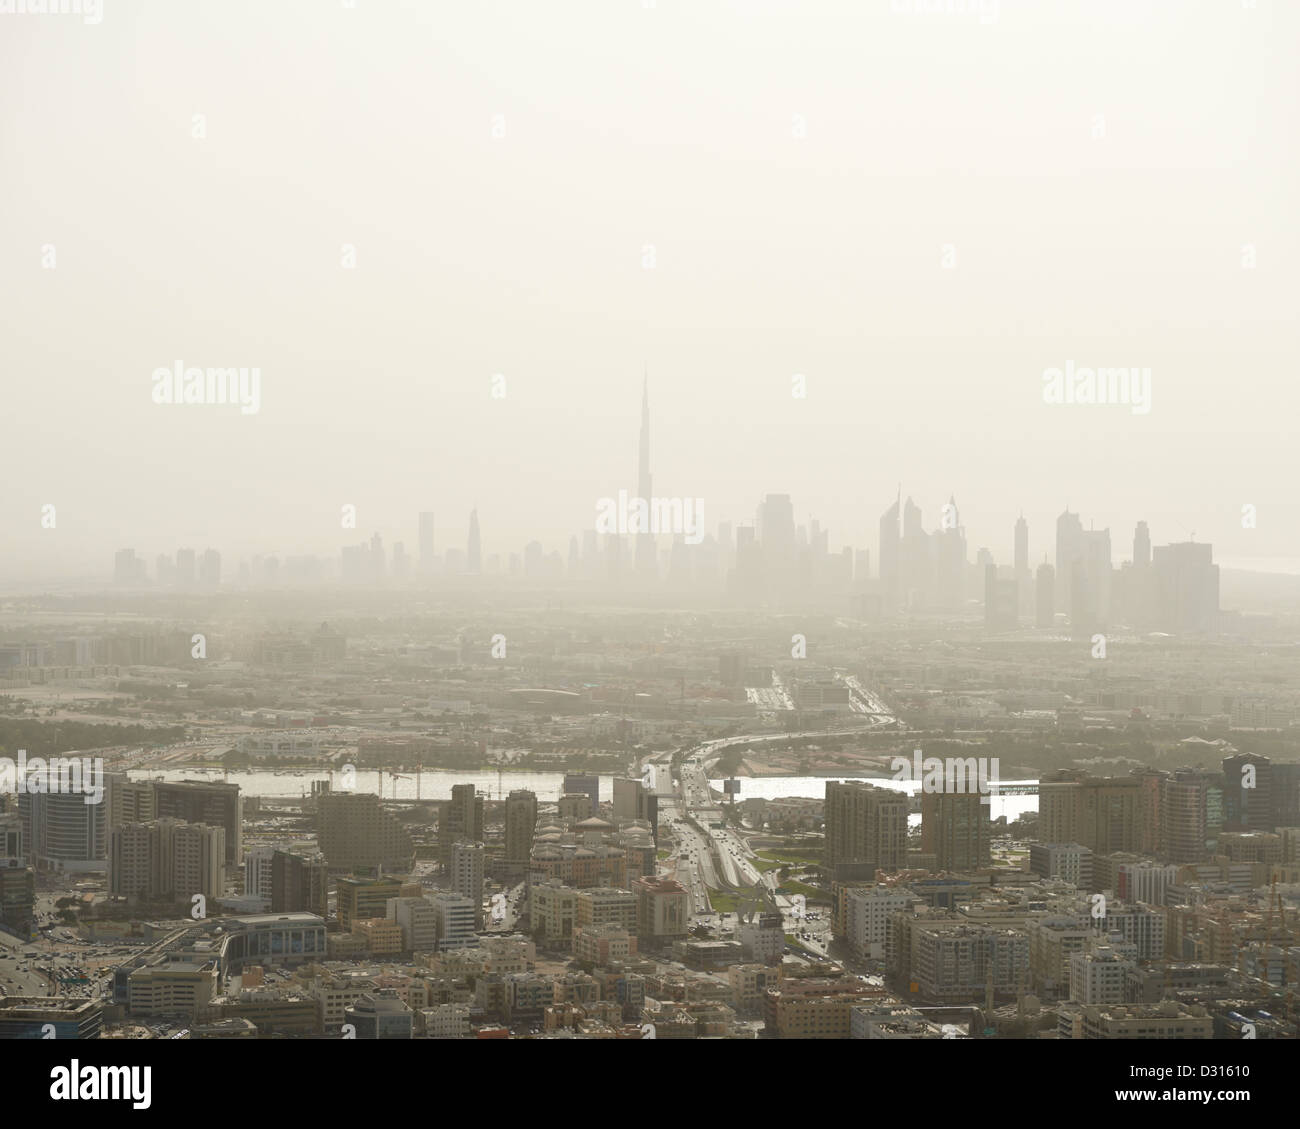 The pollution filled skyline of Dubai, with the towering Burj Khalifa Tower in the distant horizon Stock Photo